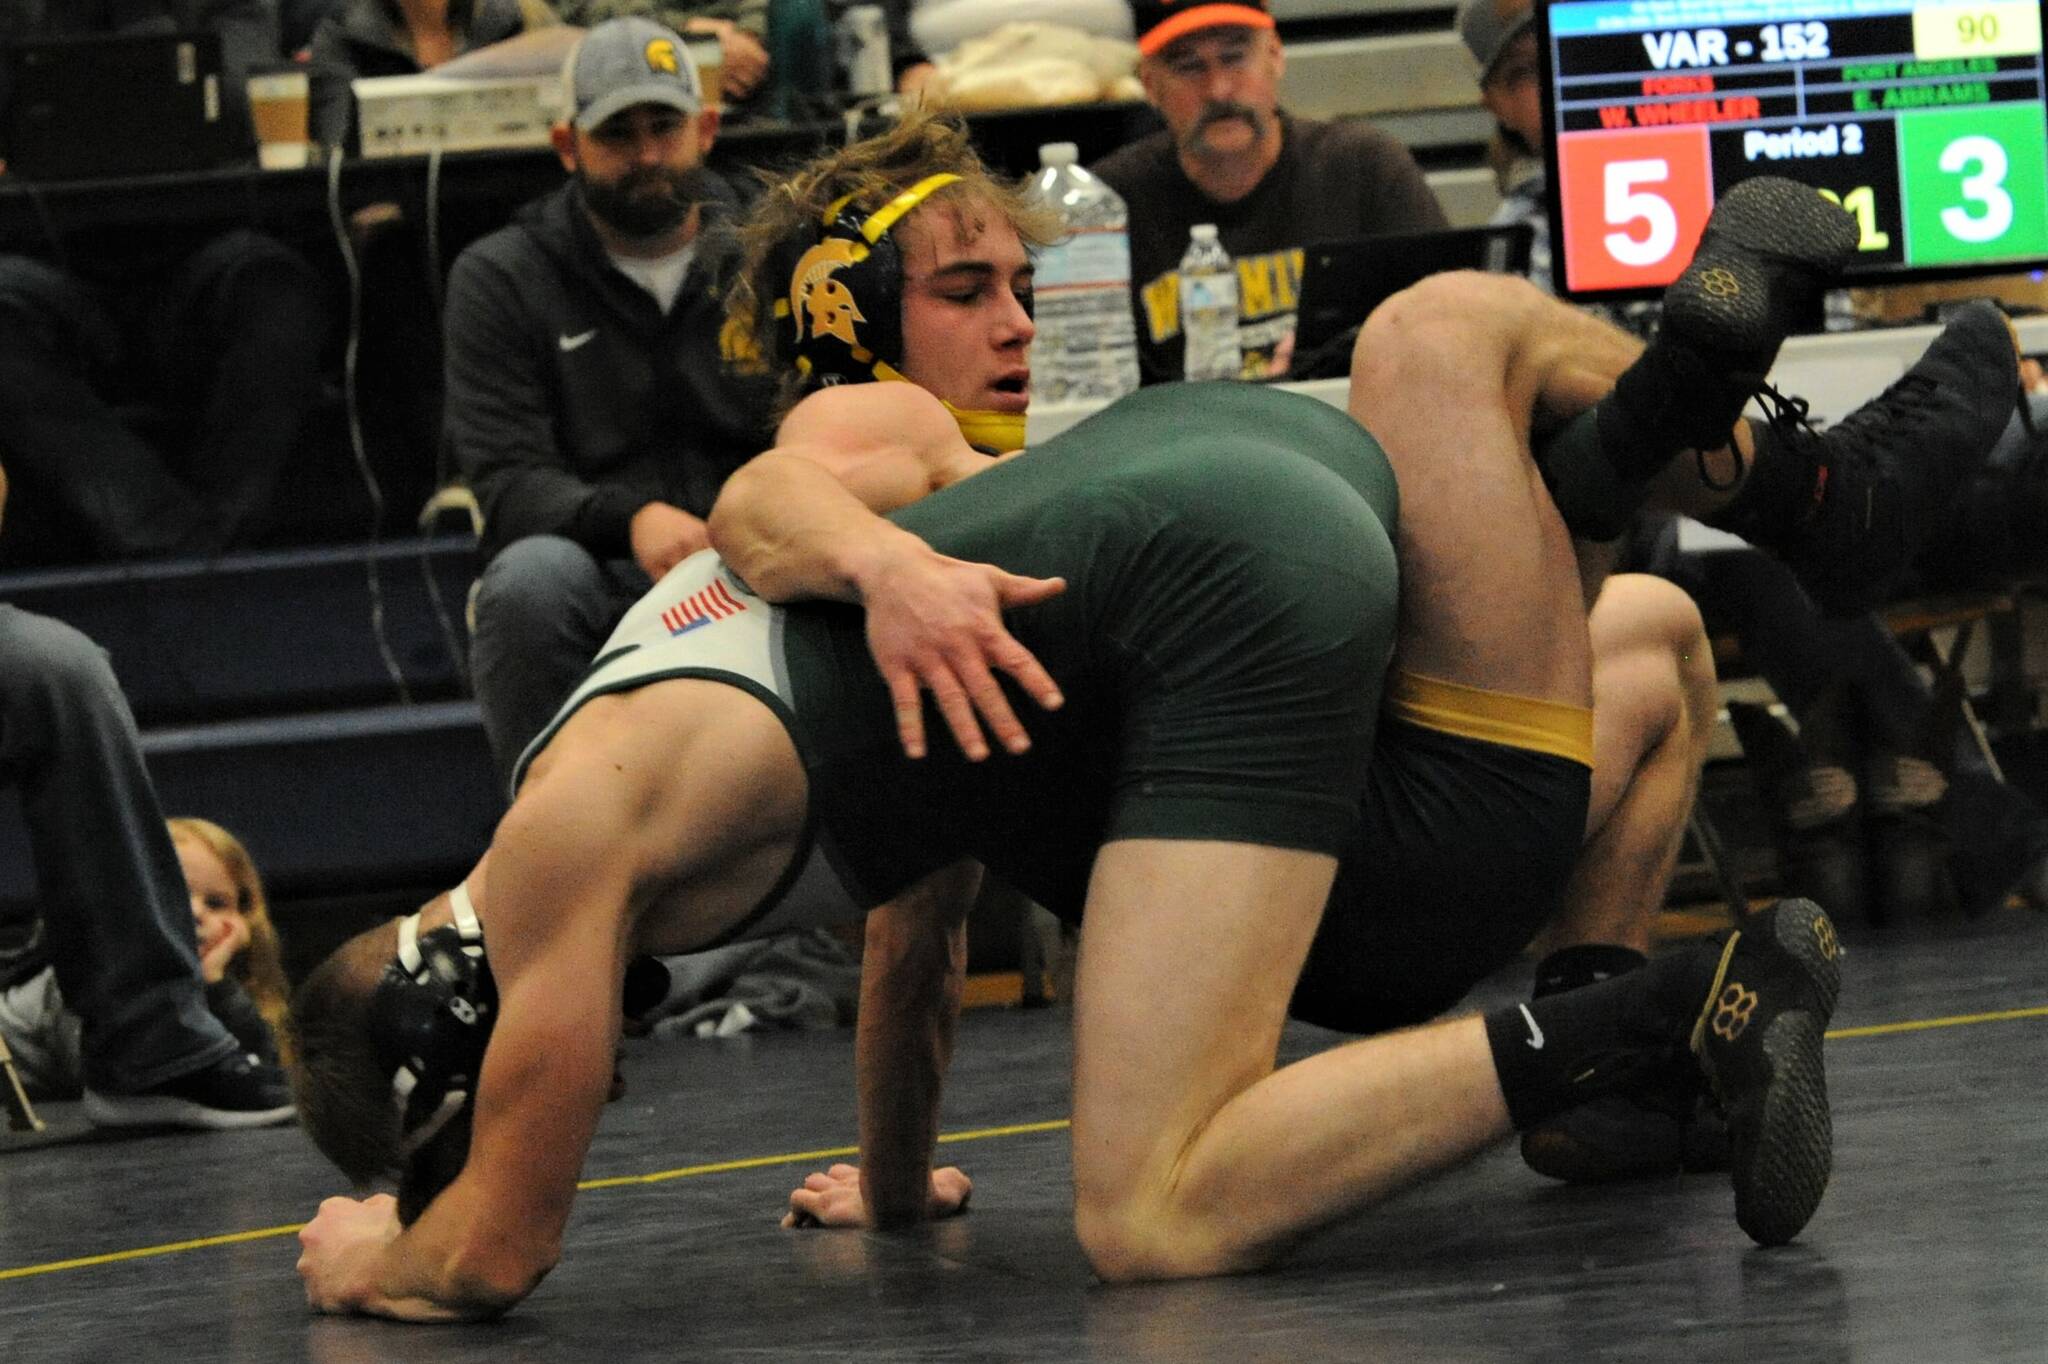 Spartan Walker Wheeler (top) defeated Abrams of Port Angeles 11 to 6 in the 152 lb class.